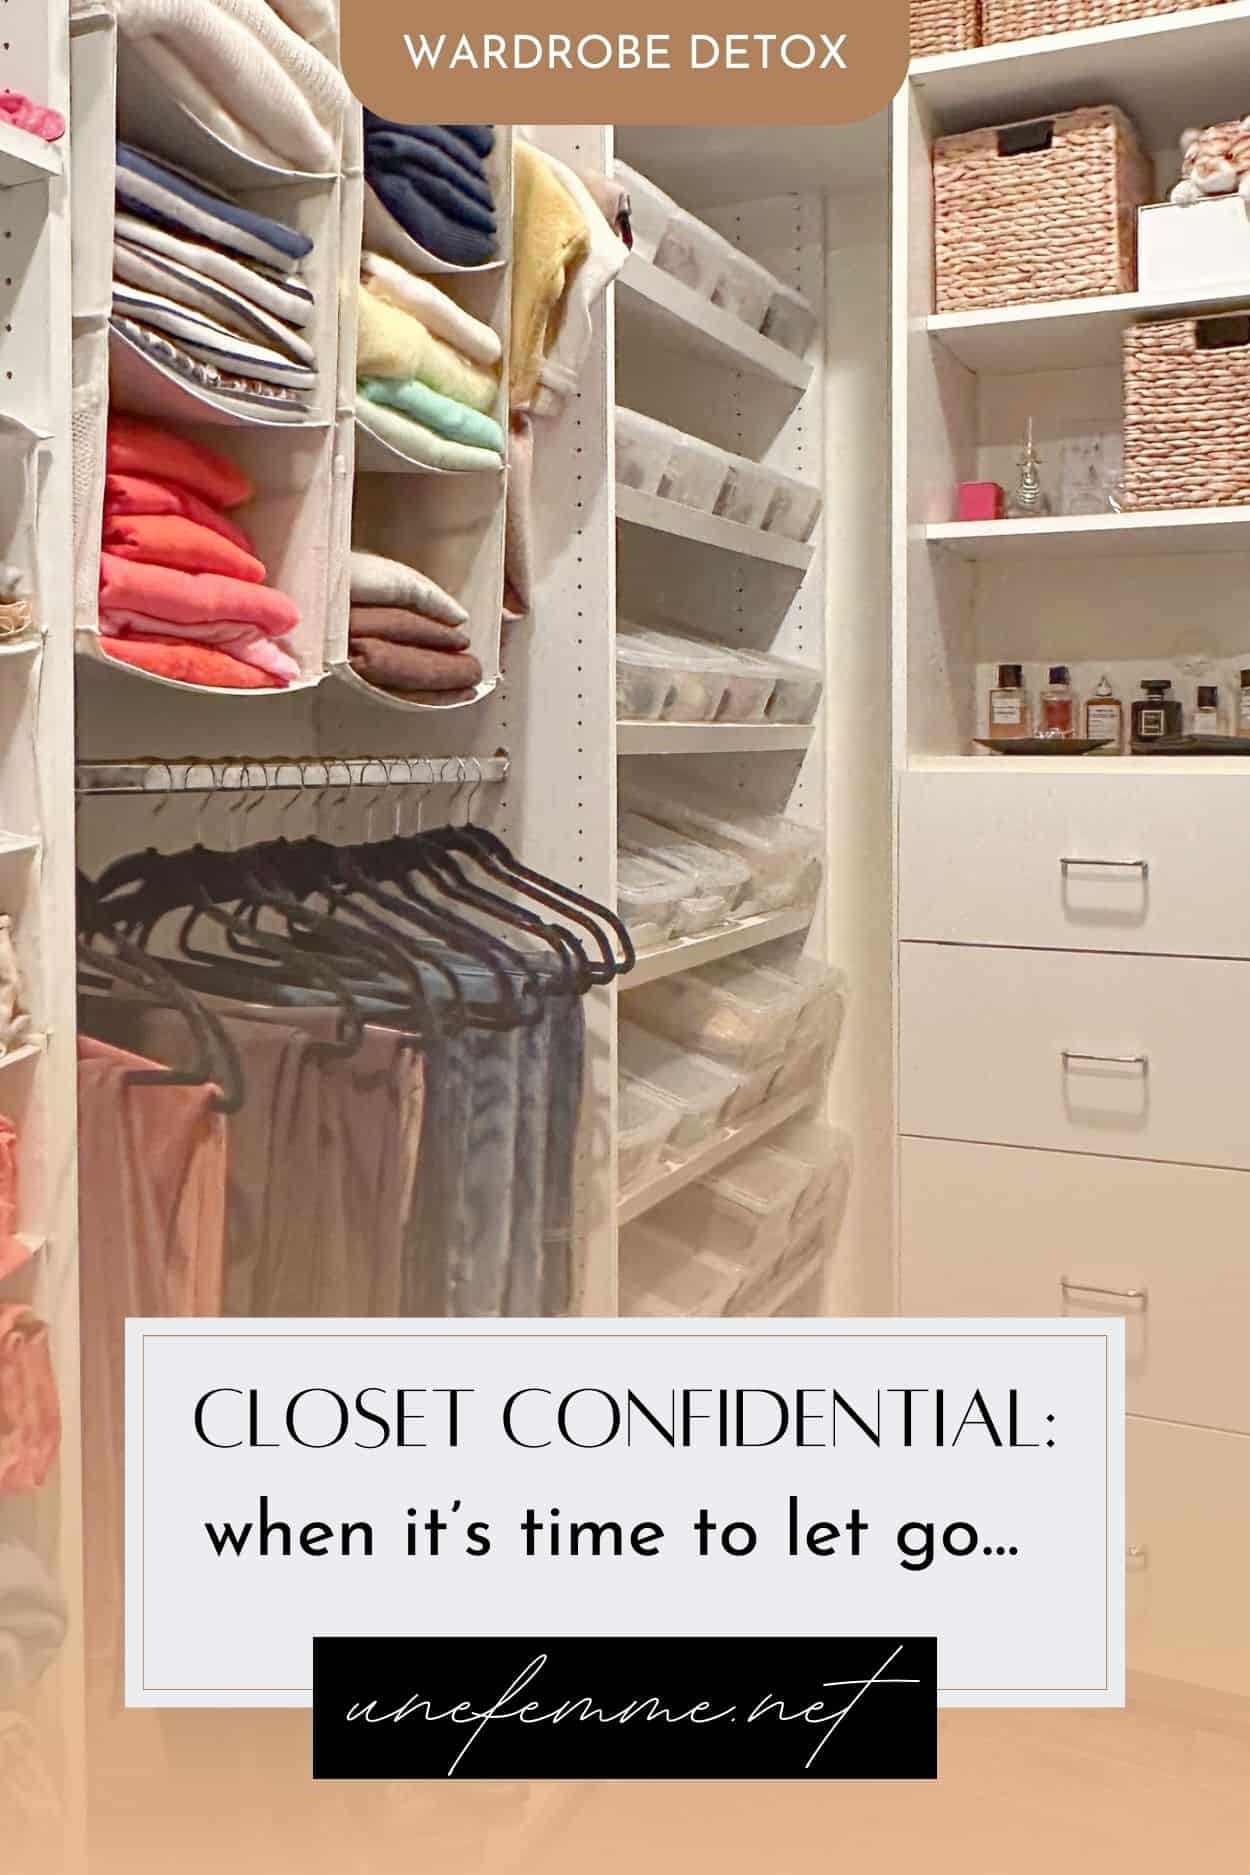 Closet confidential: learning to let go (without guilt)